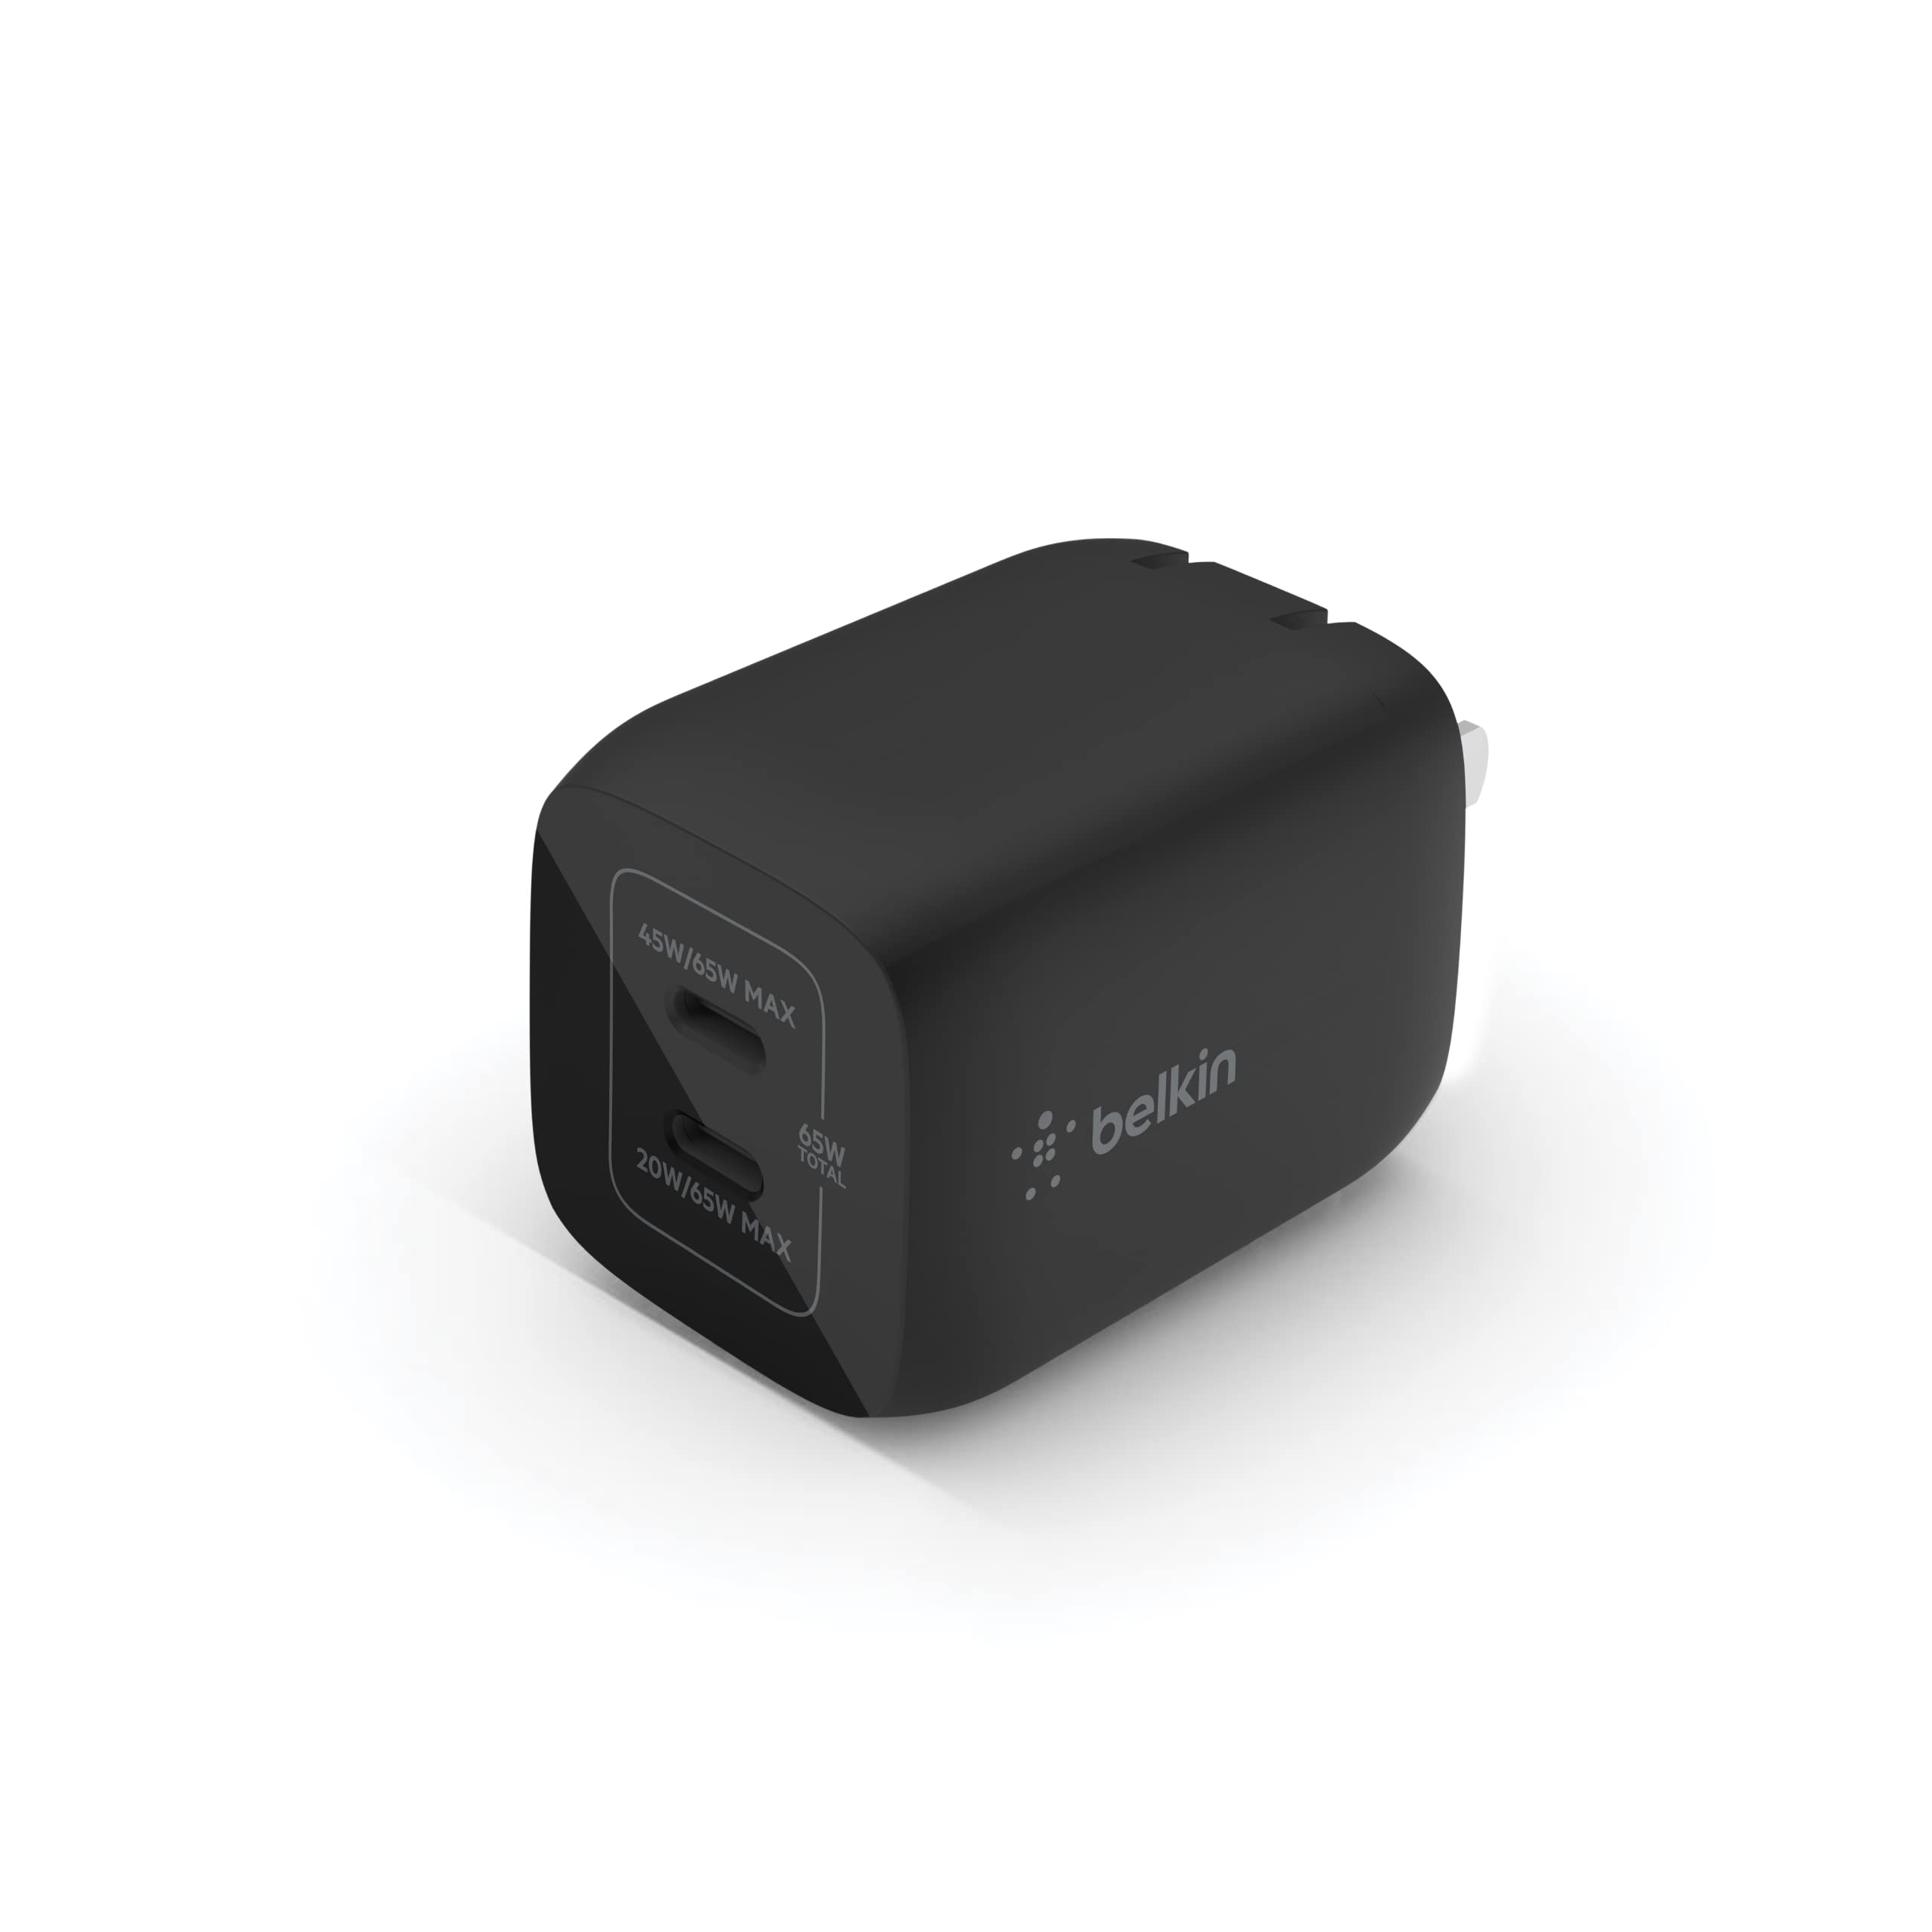 Belkin 65W Dual USB-C Wall Charger, Fast Charging Power Delivery 3.0 with GaN Technology for iPhone 14, 13, Pro, Pro Max, Mini, iPad Pro 12.9, MacBook, Galaxy S23, S23+, Ultra, Tablet, More - Black